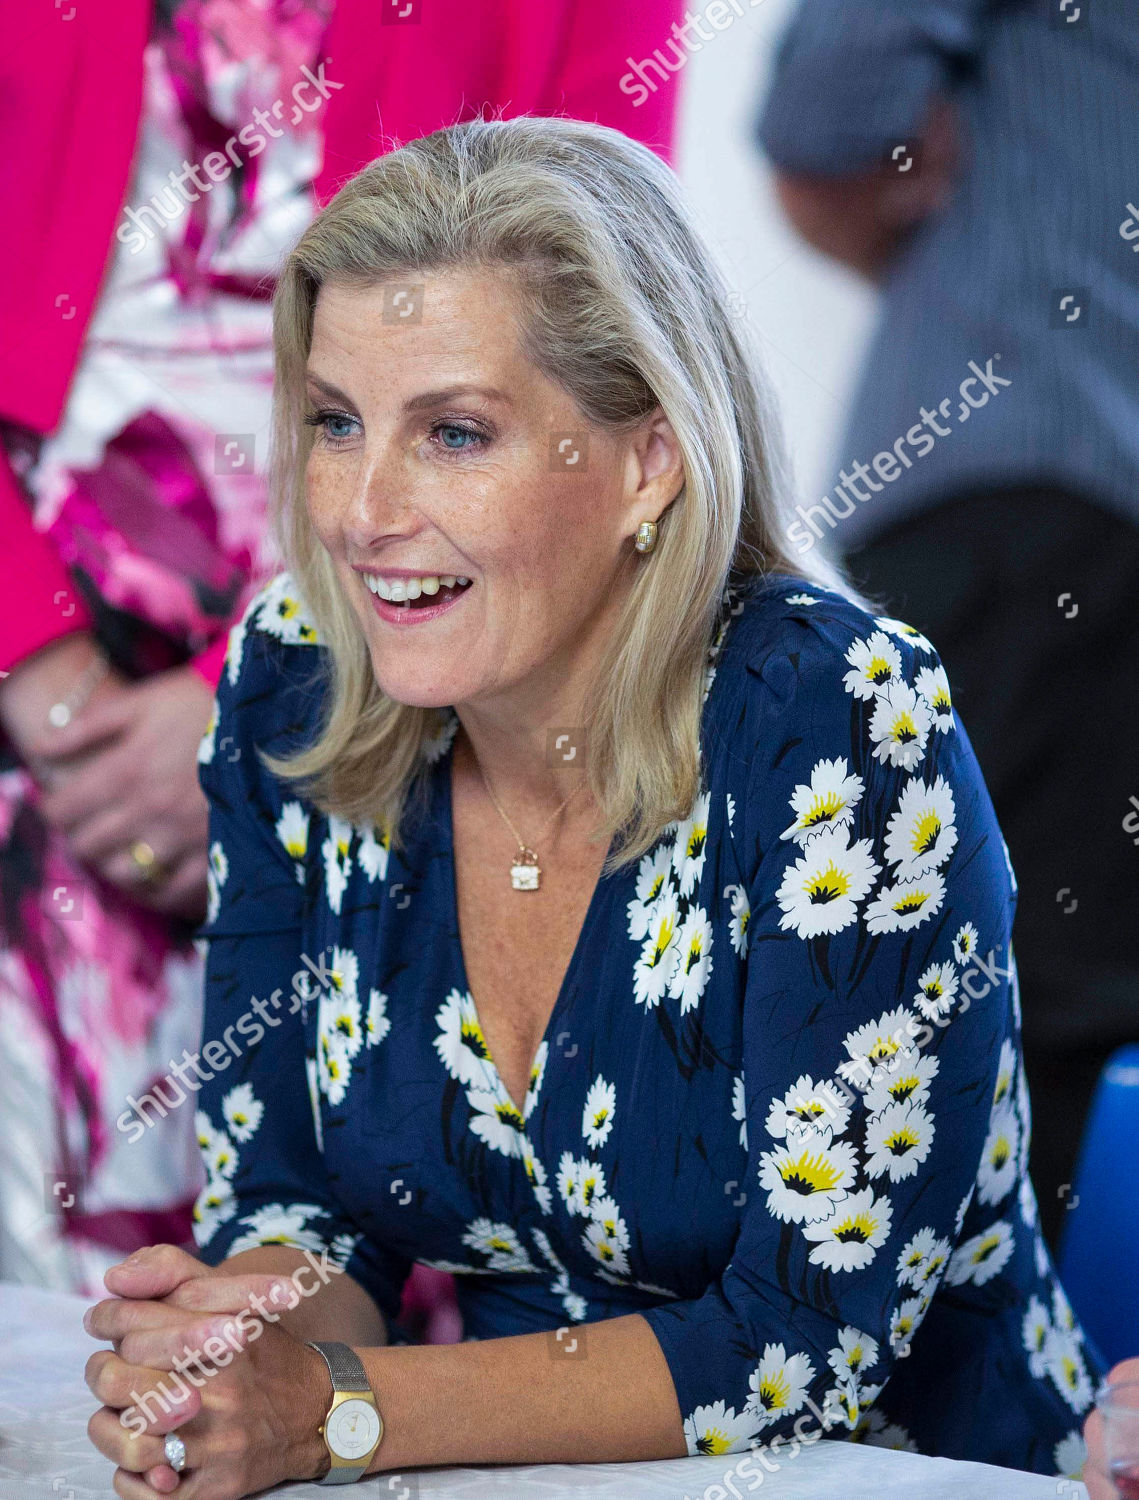 sophie-countess-of-wessex-visits-the-me2-club-tea-party-woodley-uk-shutterstock-editorial-9885213e.jpg